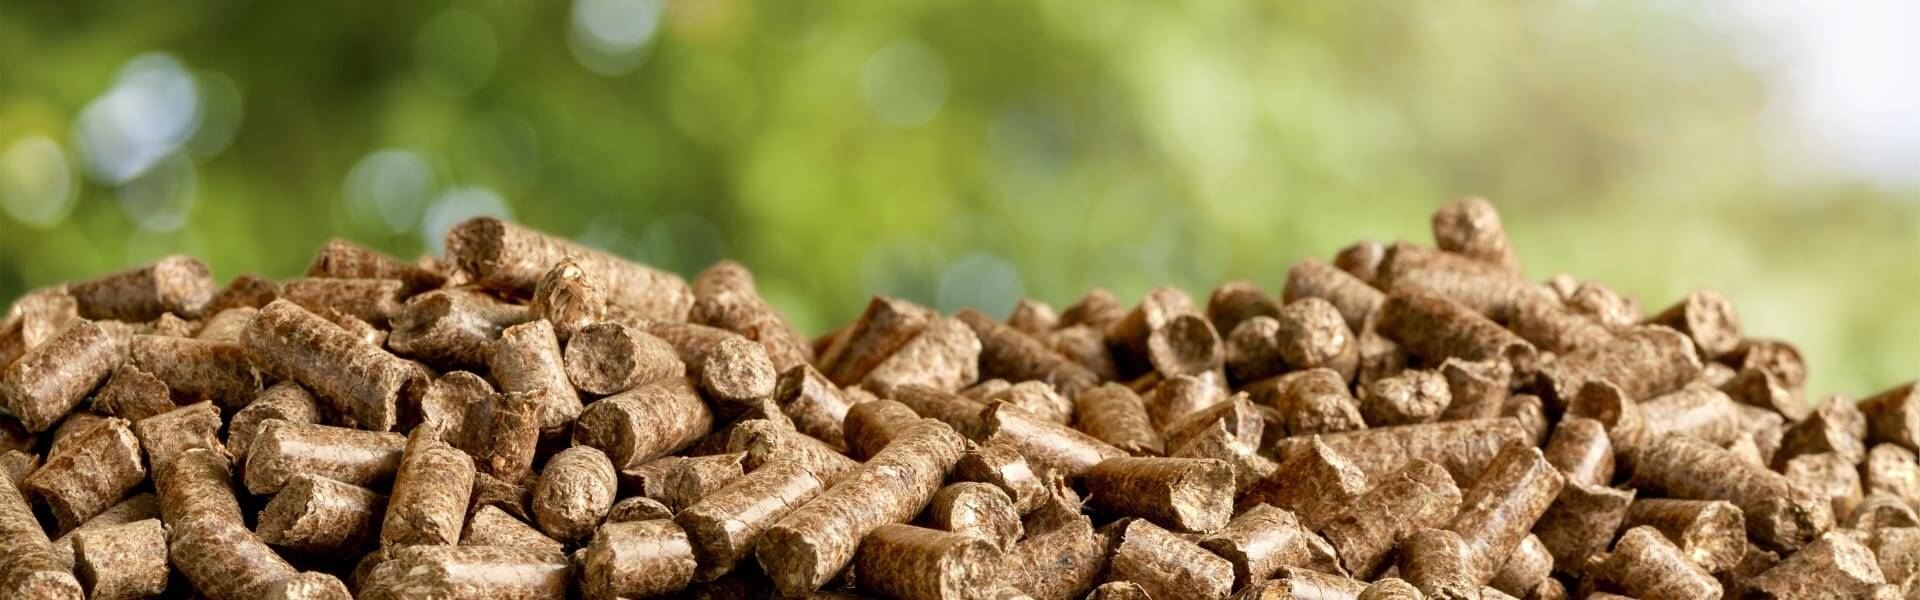 Government urged to rethink blanket ban on biomass CfDs